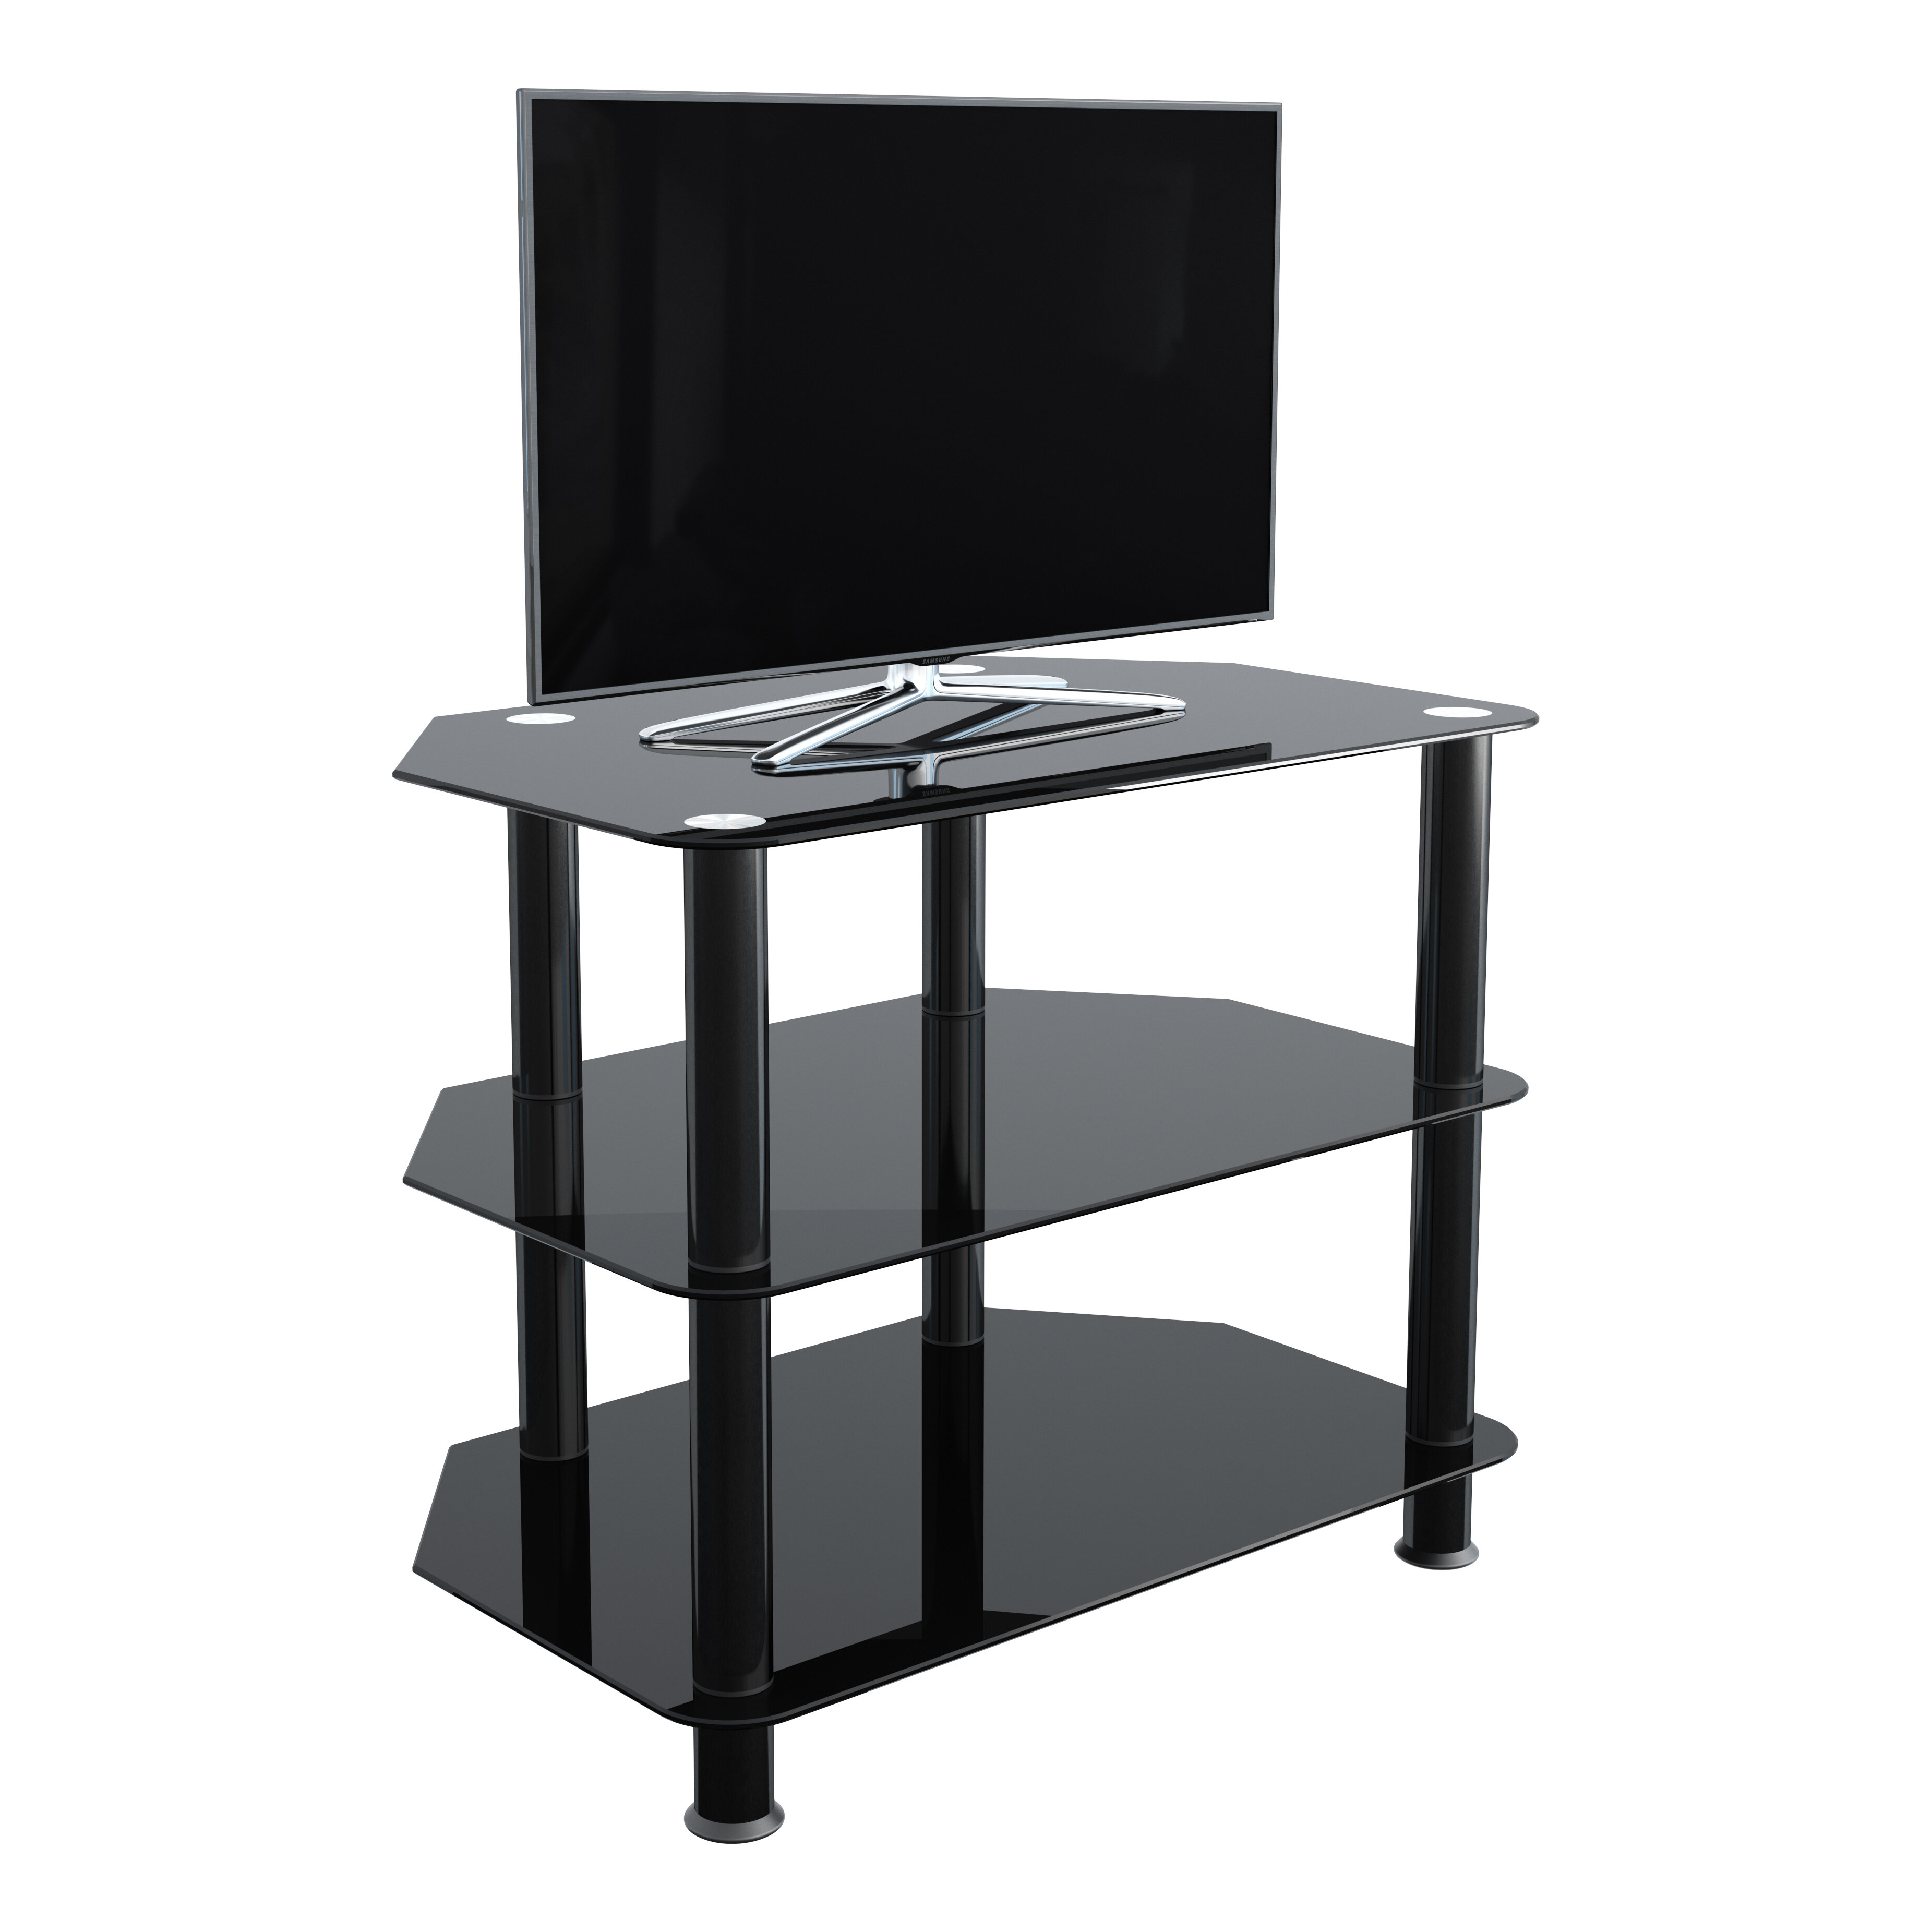 Details about   AVF SDC600-A TV Stand for Up to 32-Inch TVs Black Glass Assorted Styles 